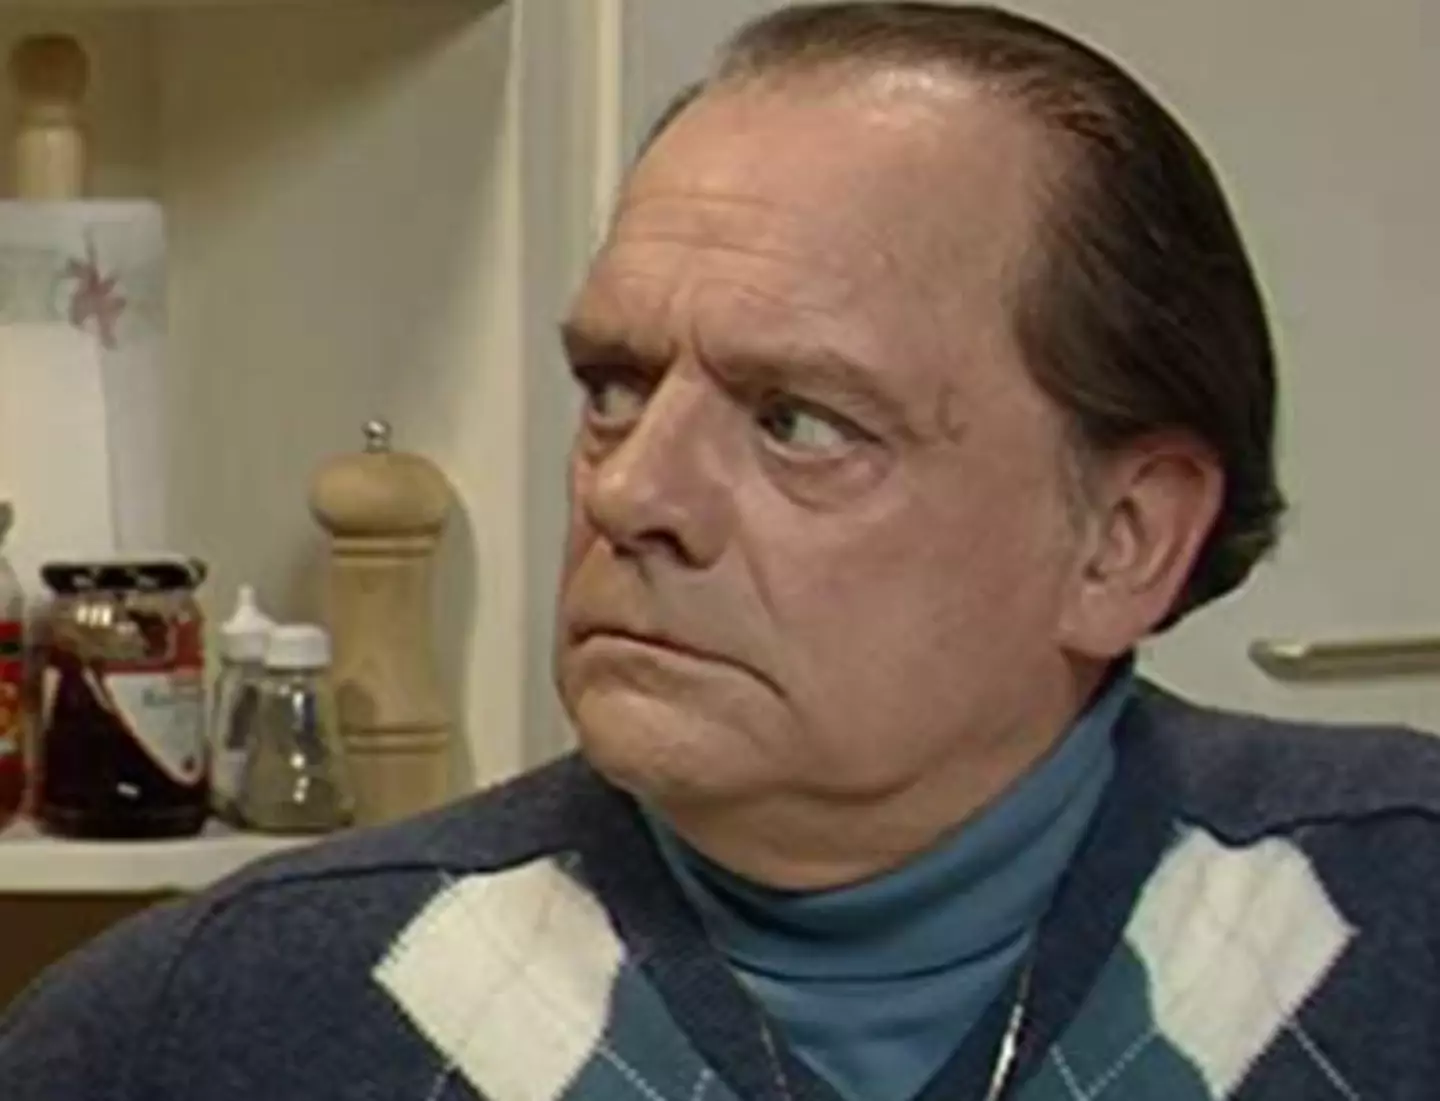 David Jason is best known for his role as Del Boy.